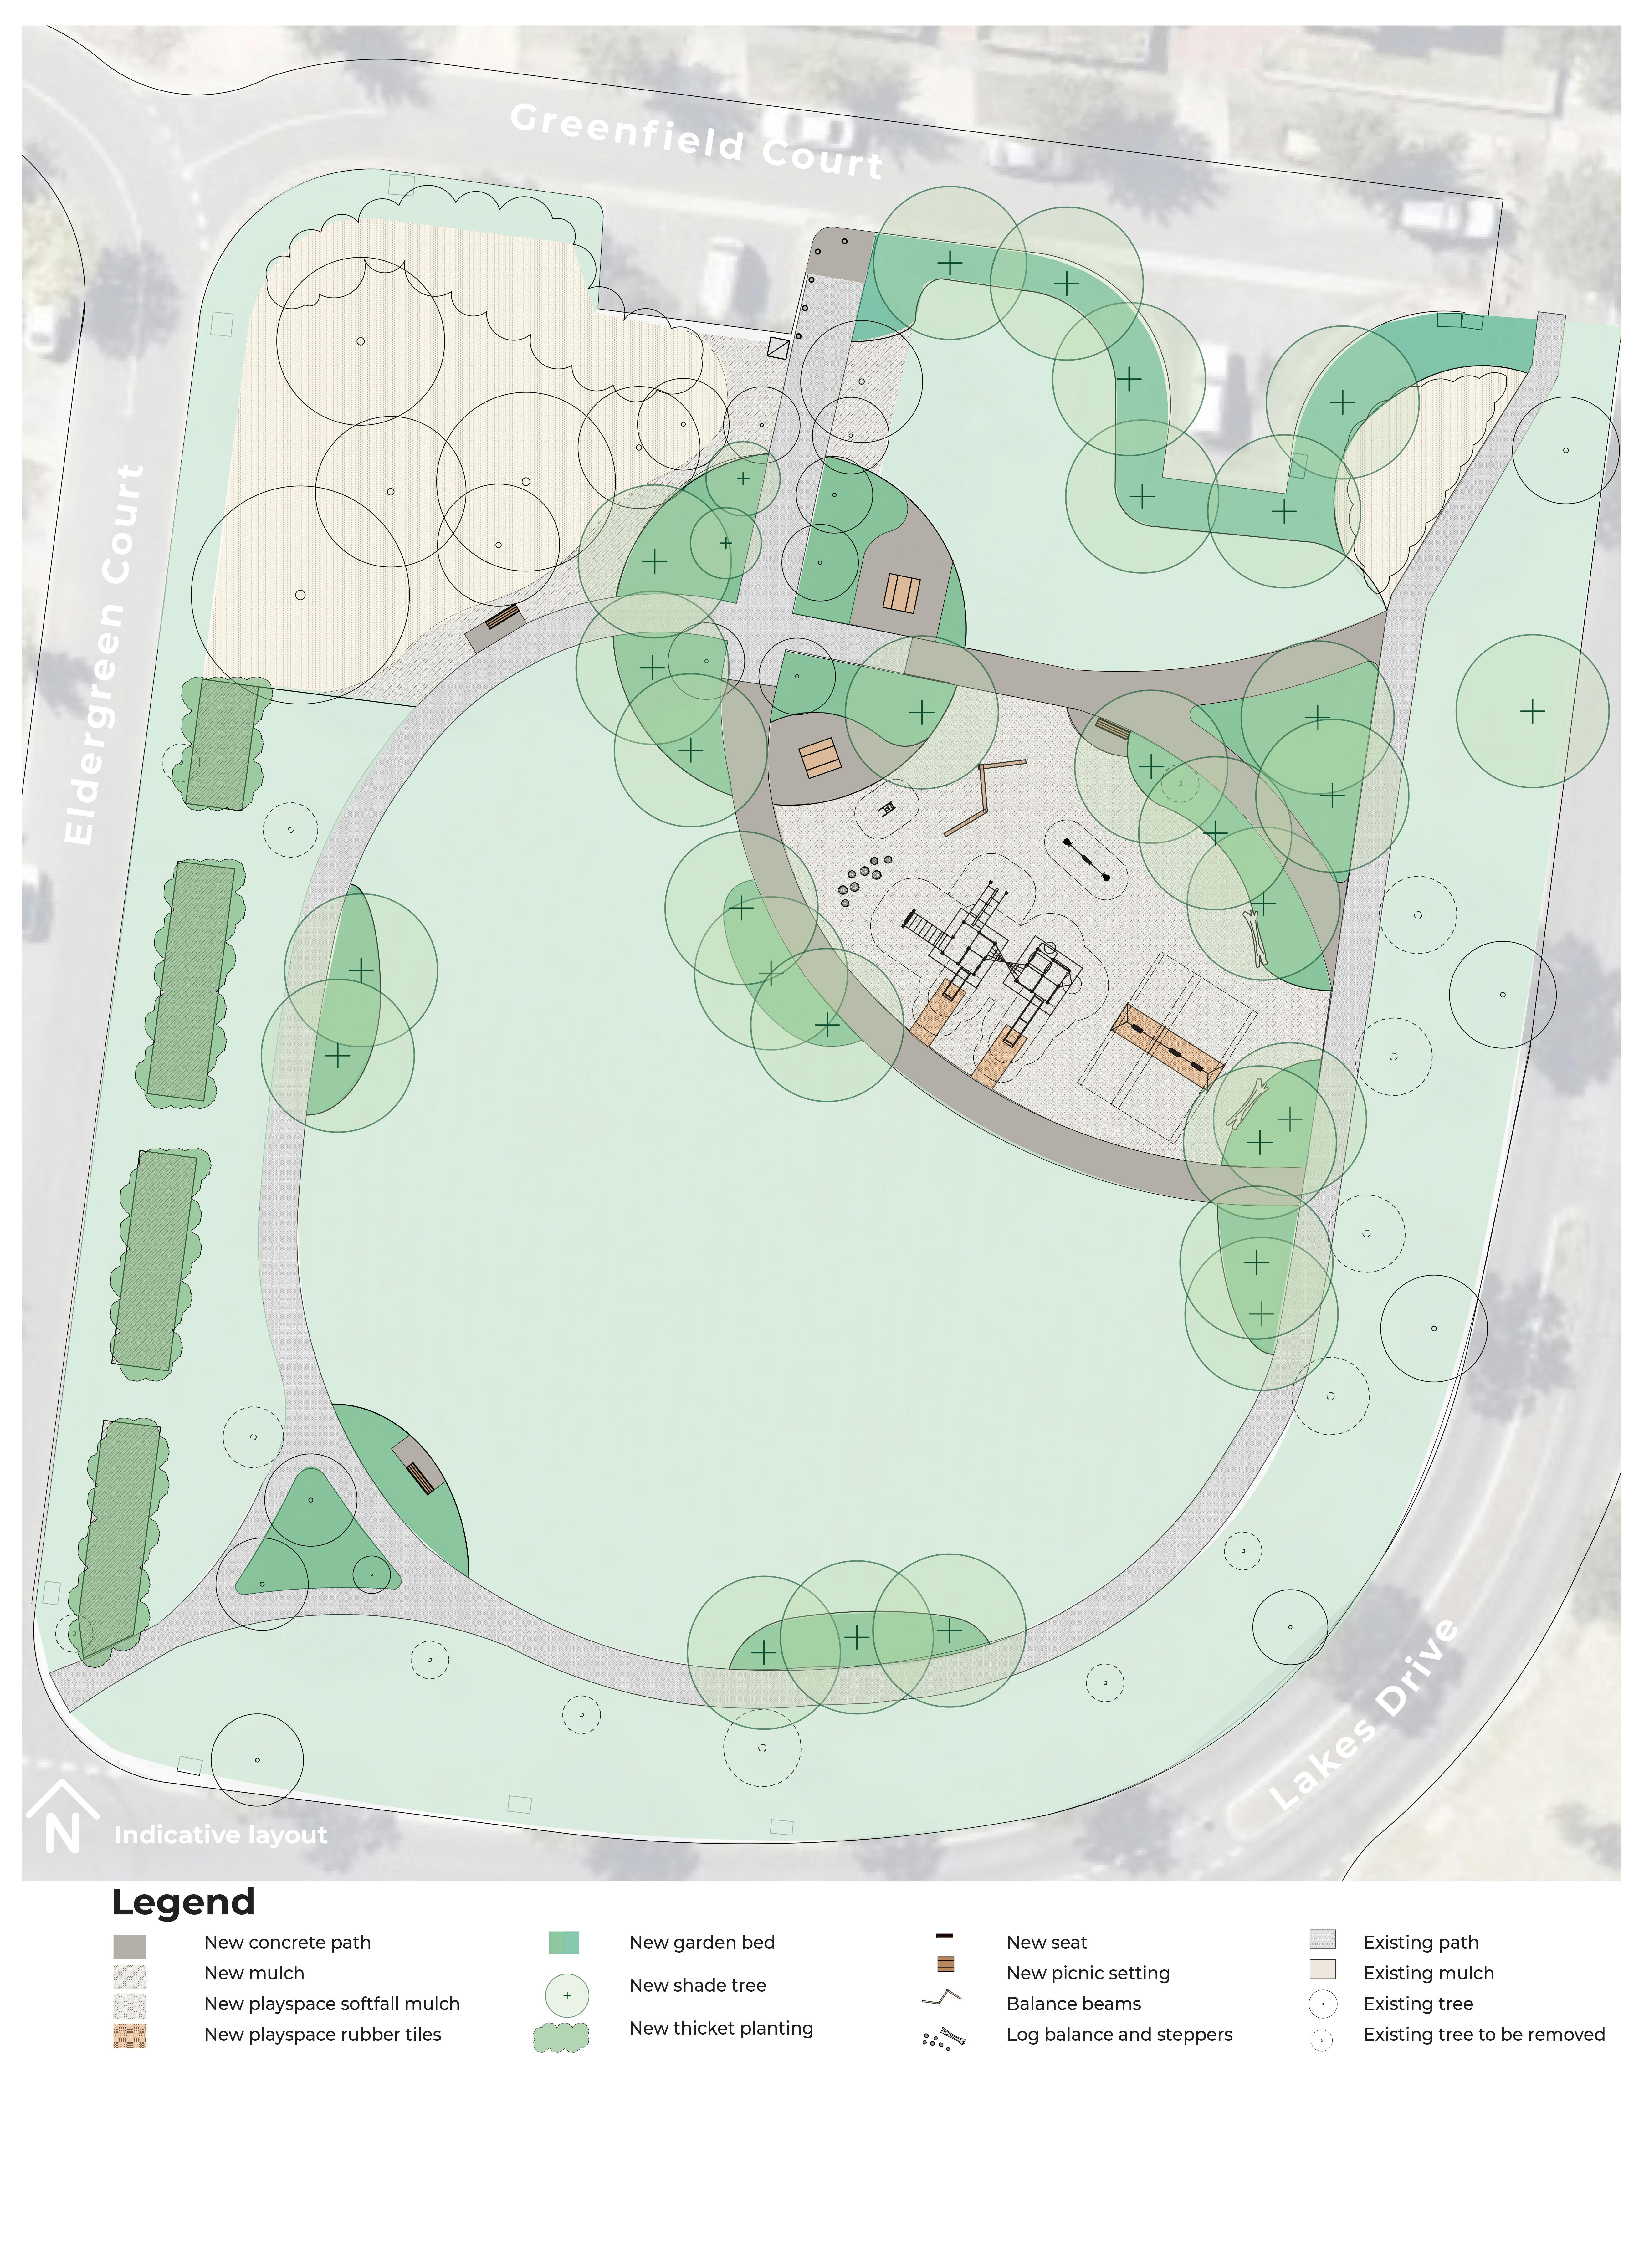 Greenfield Court Reserve - Play & Landscape Concept Plan